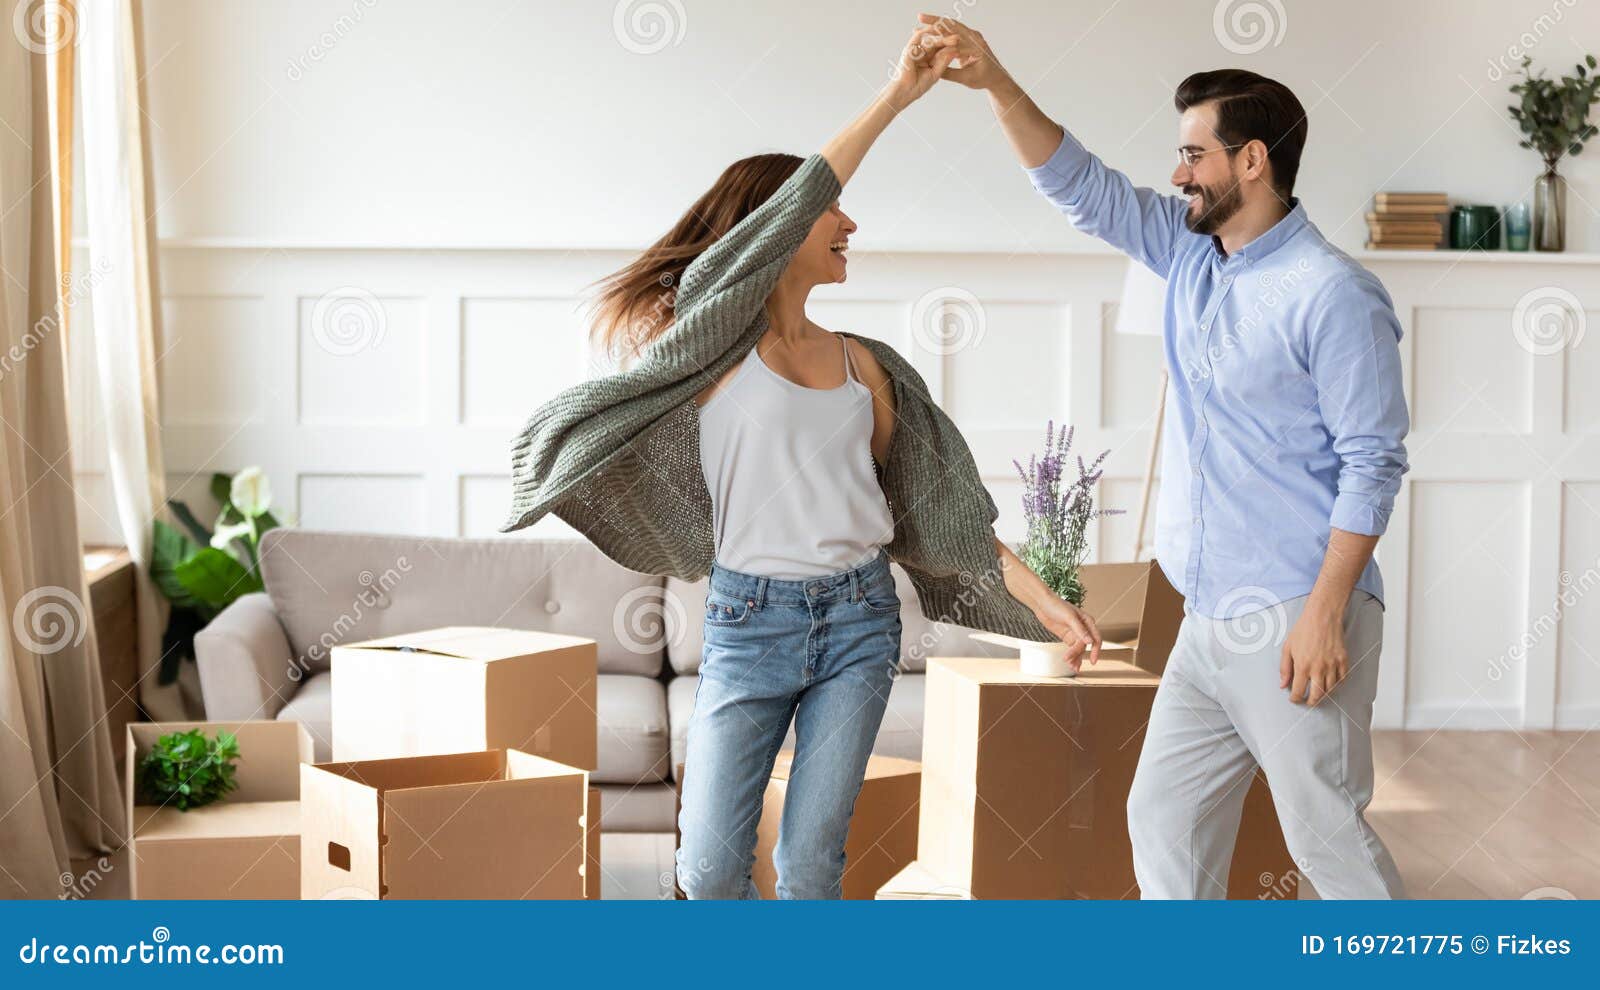 overjoyed couple dance have fun on moving day